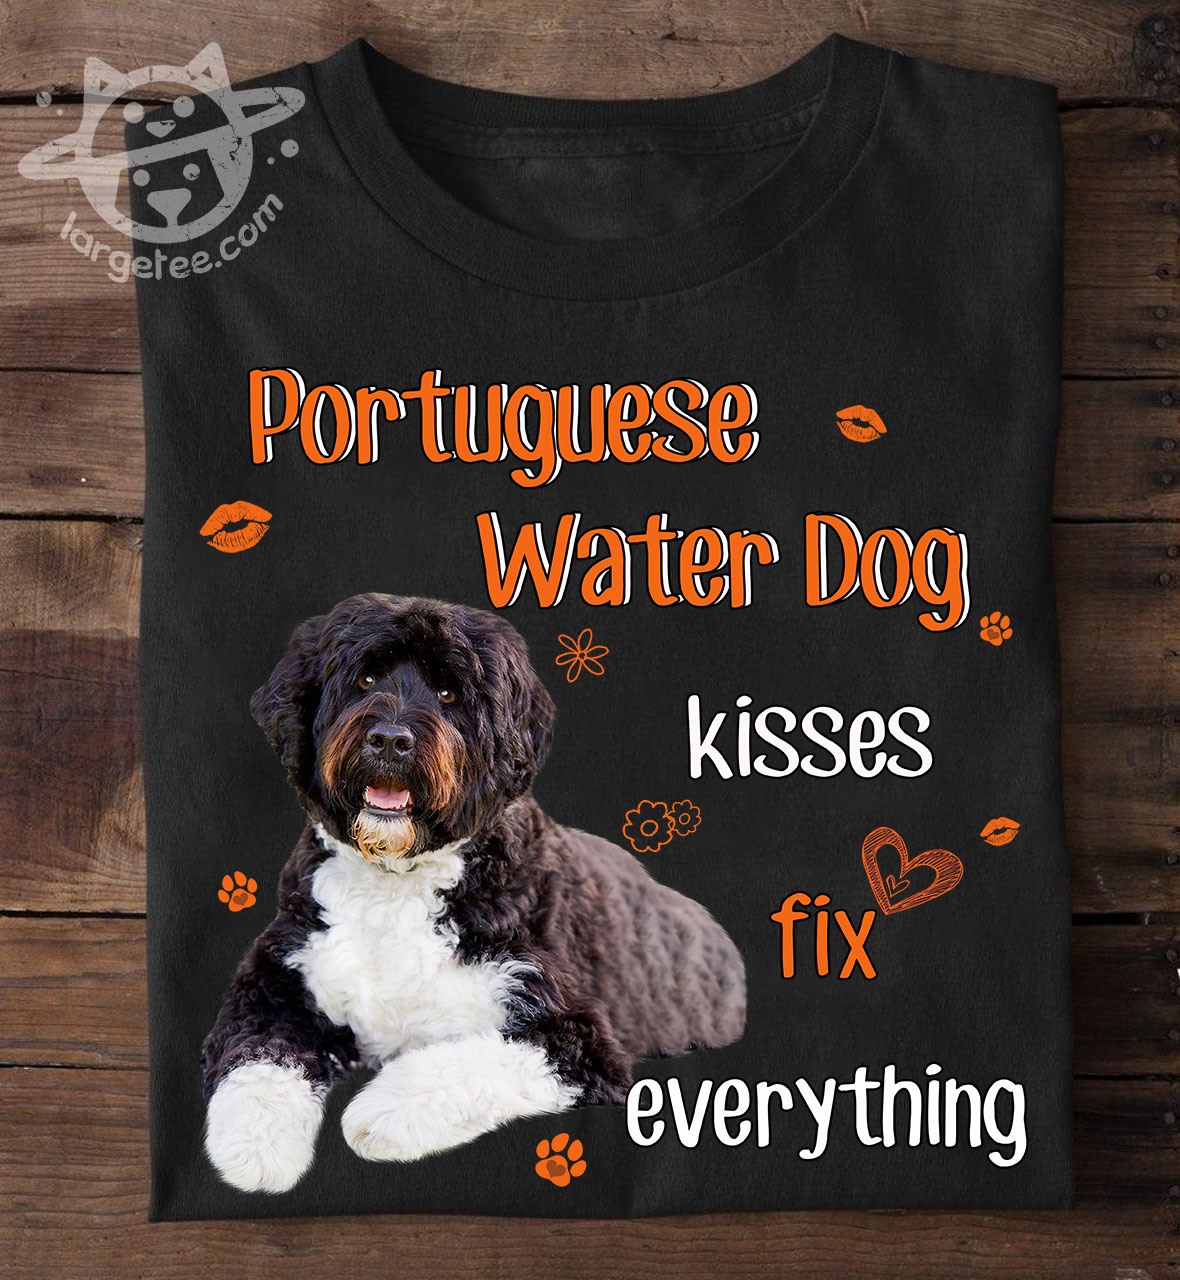 Portugueses water dog kisses fix everything - Dog lover